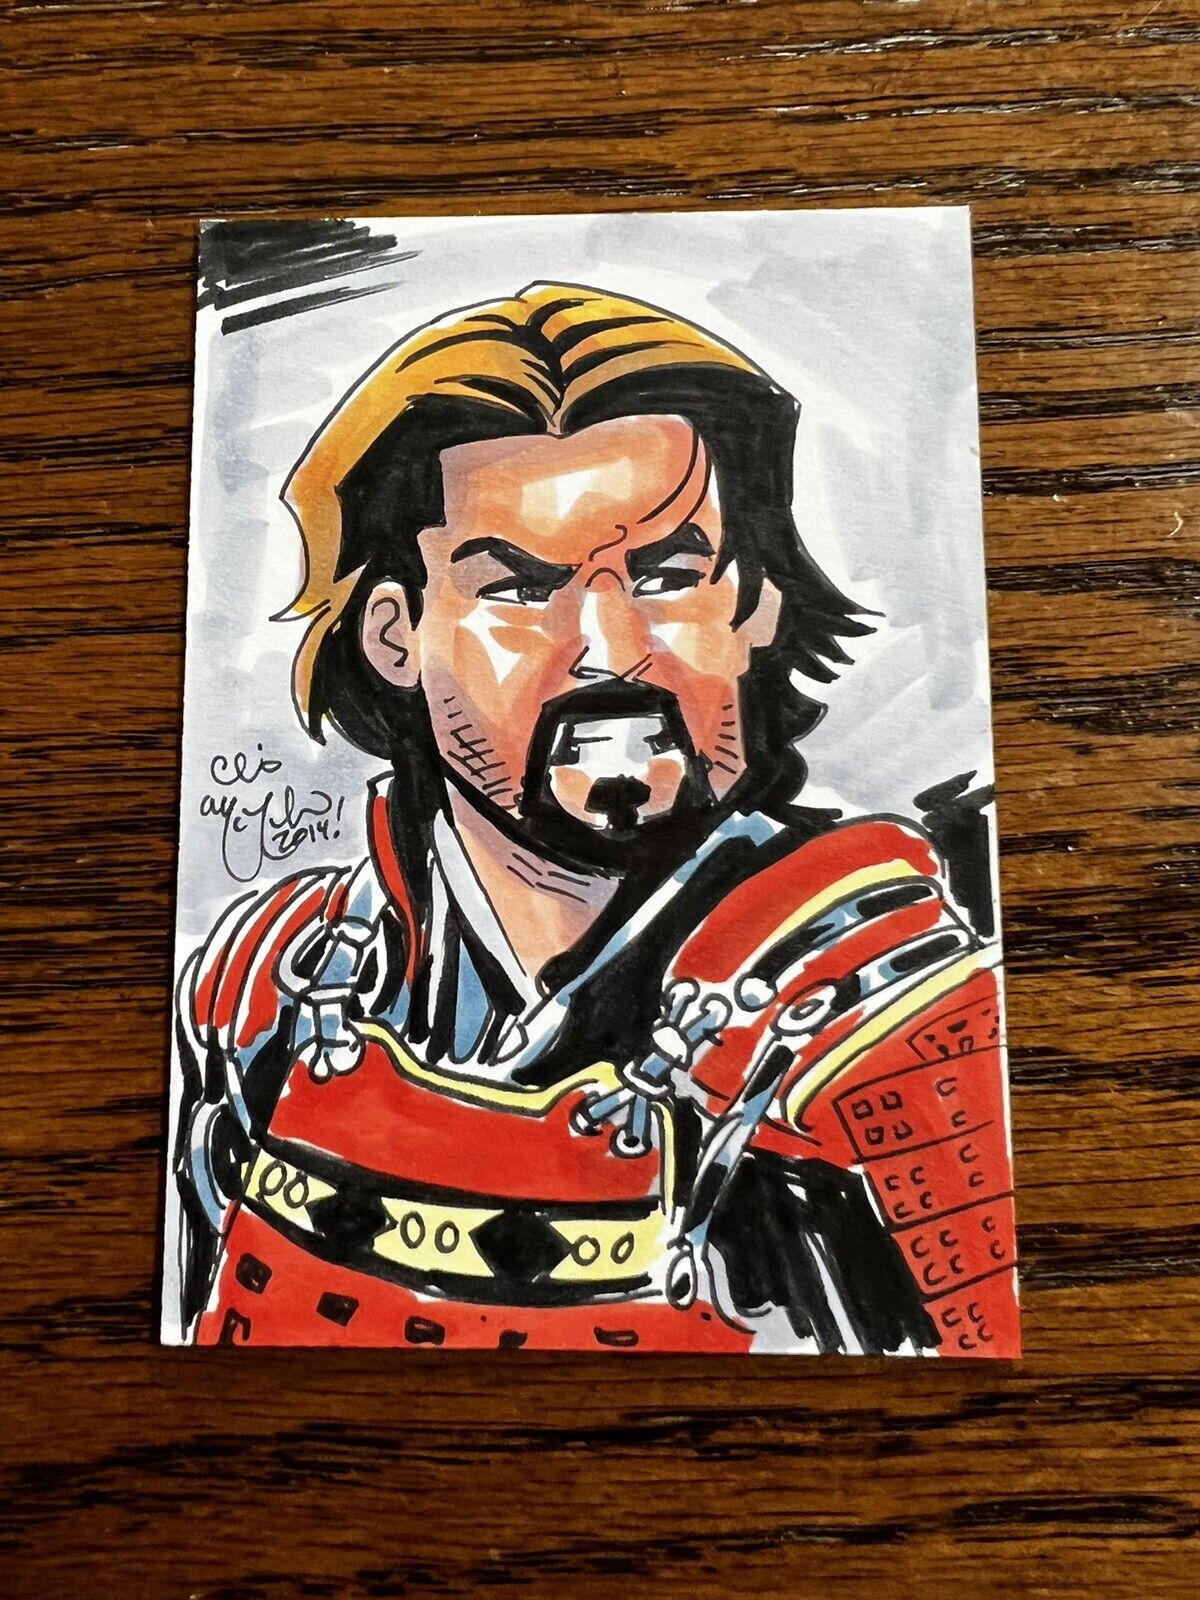 Tom Cruise “last Samurai” Full Color One Of One Sketch Card